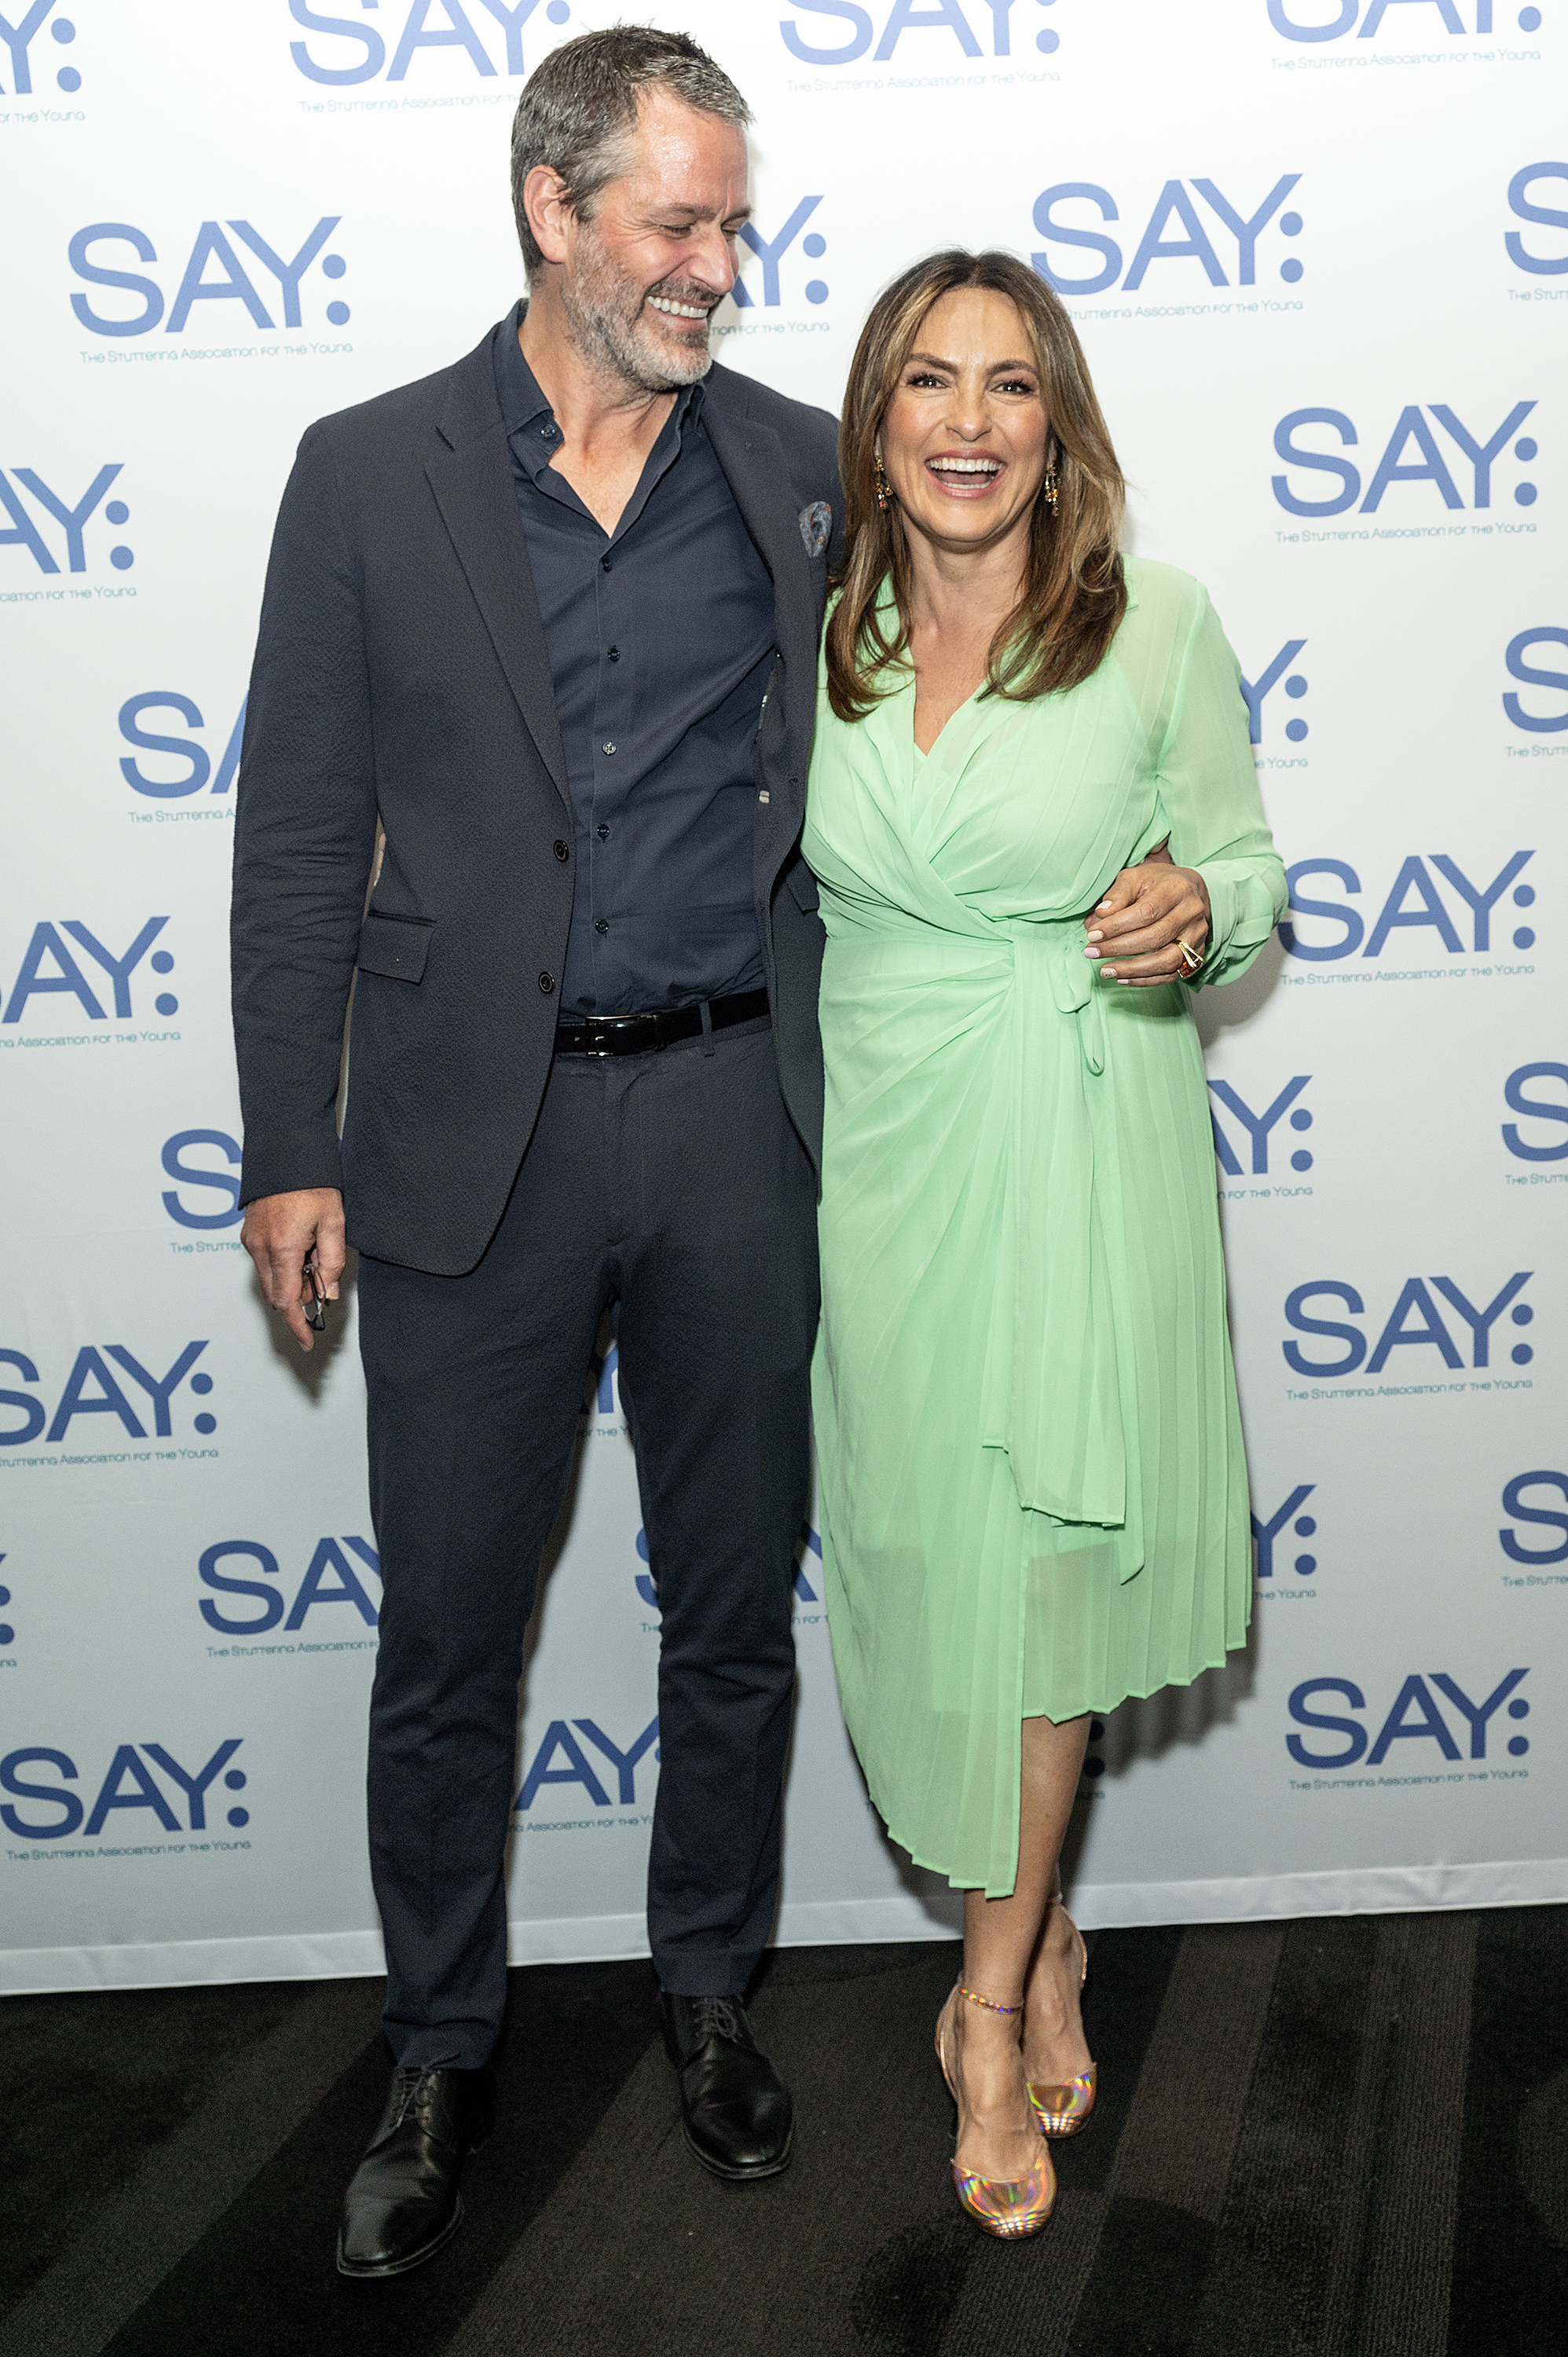 Peter Hermann and Mariska Hargitay posing together at the 2023 Stuttering Association For The Young (SAY) Benefit Gala in New York, 2023 | Source: Getty Images